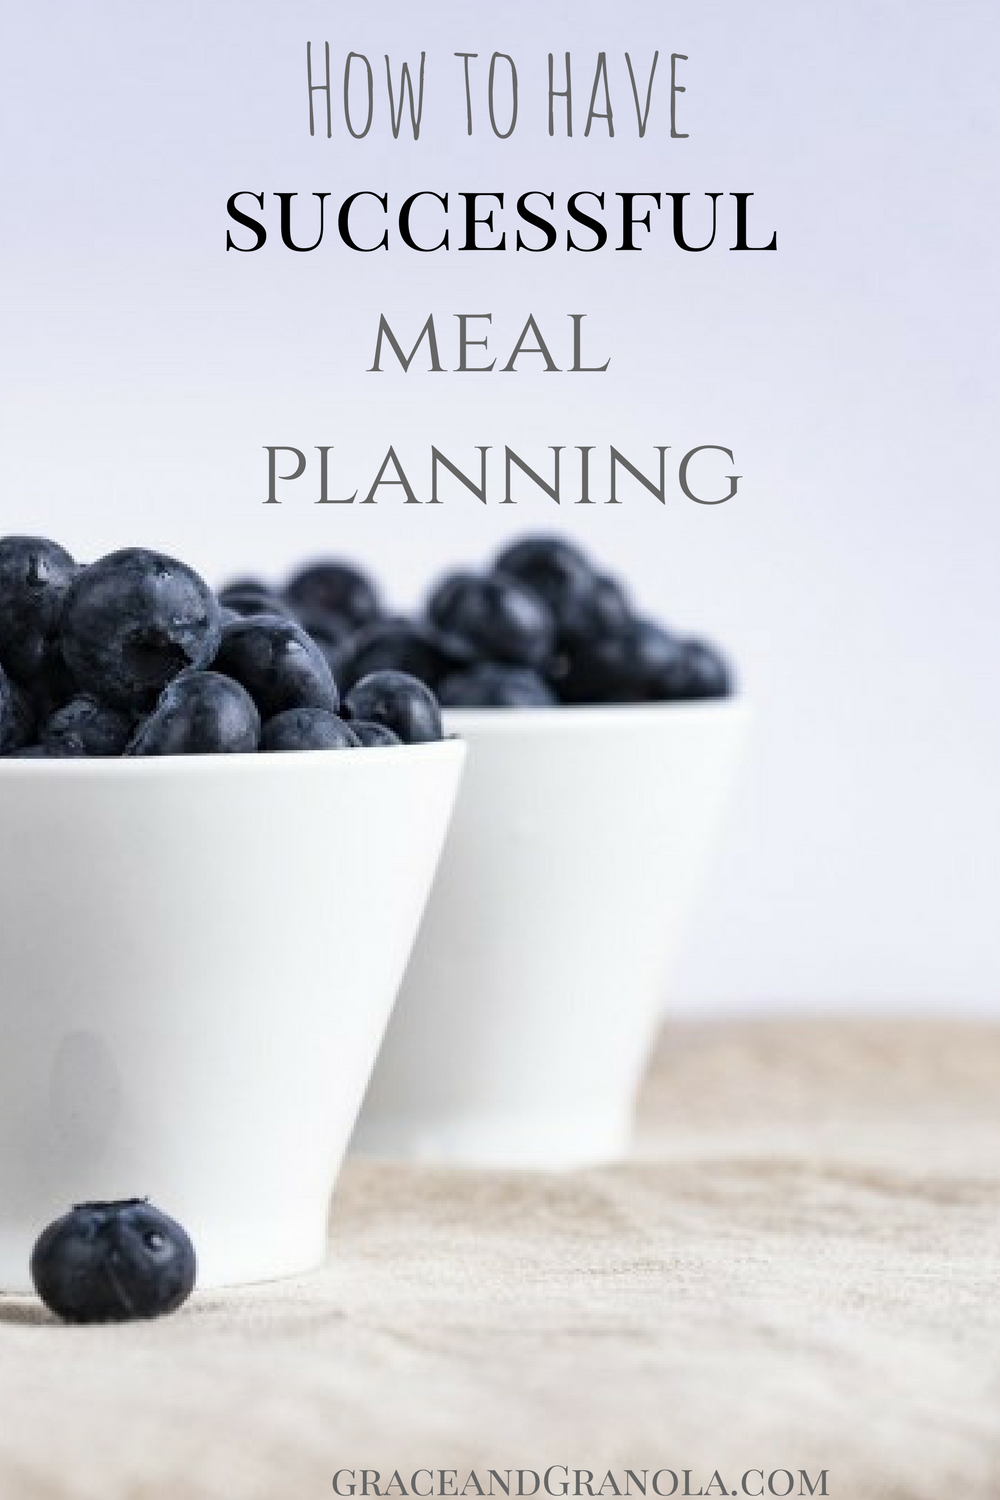 3 Tips for Meal Planning